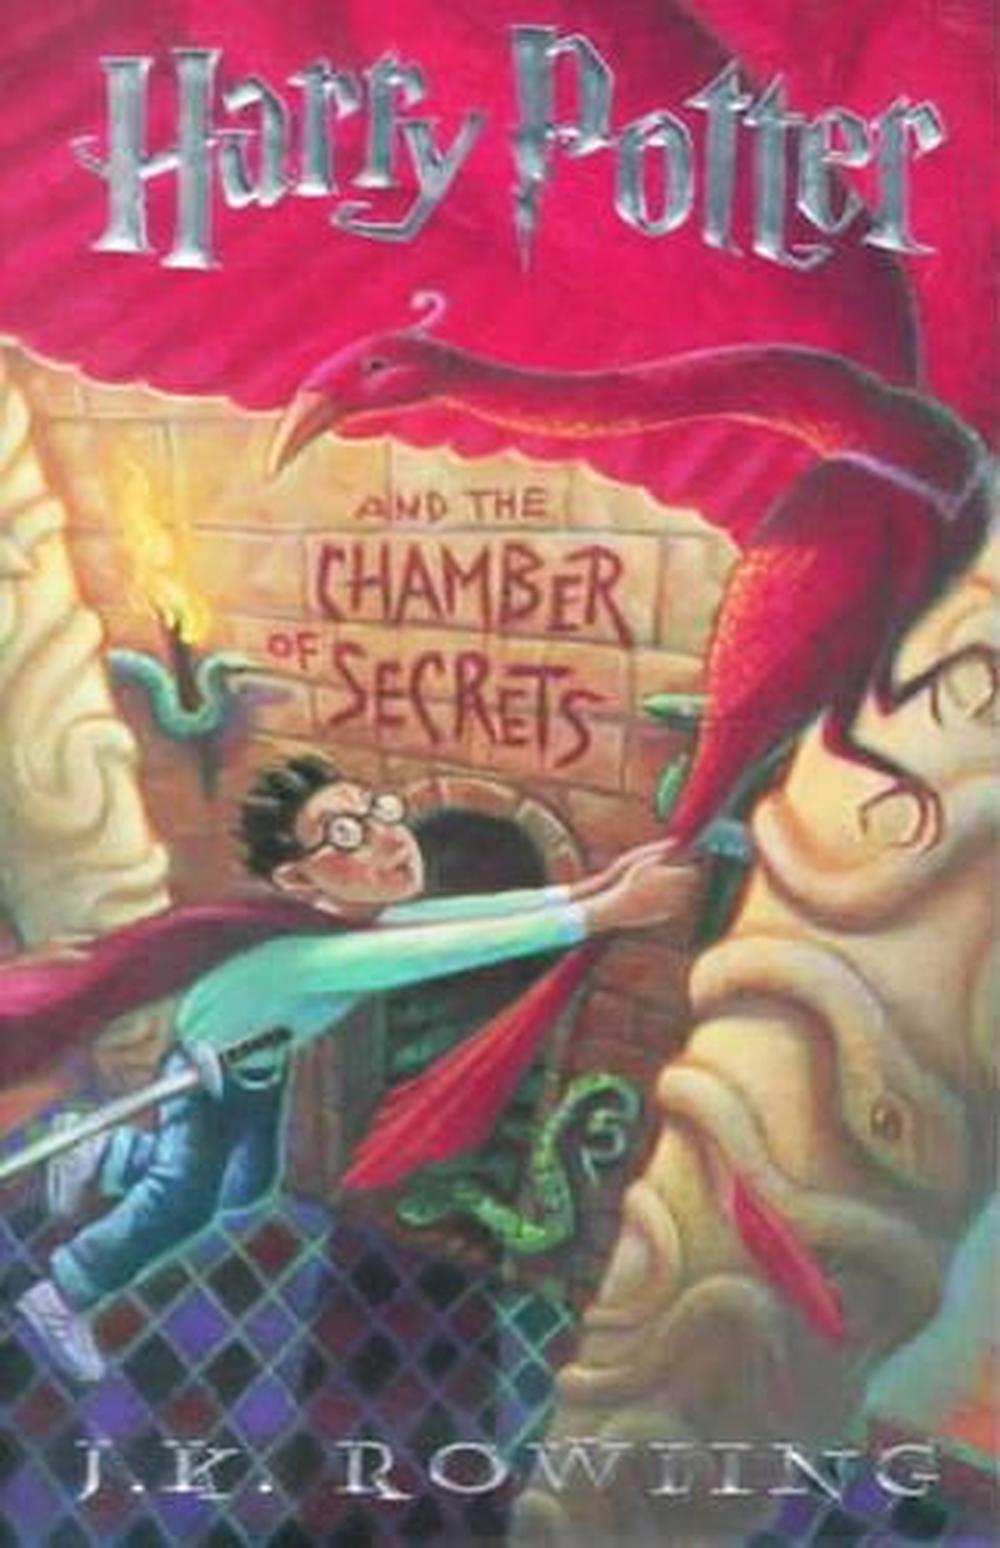 Harry Potter And The Chamber Of Secrets By J K Rowling English Hardcover Book 9780786222735